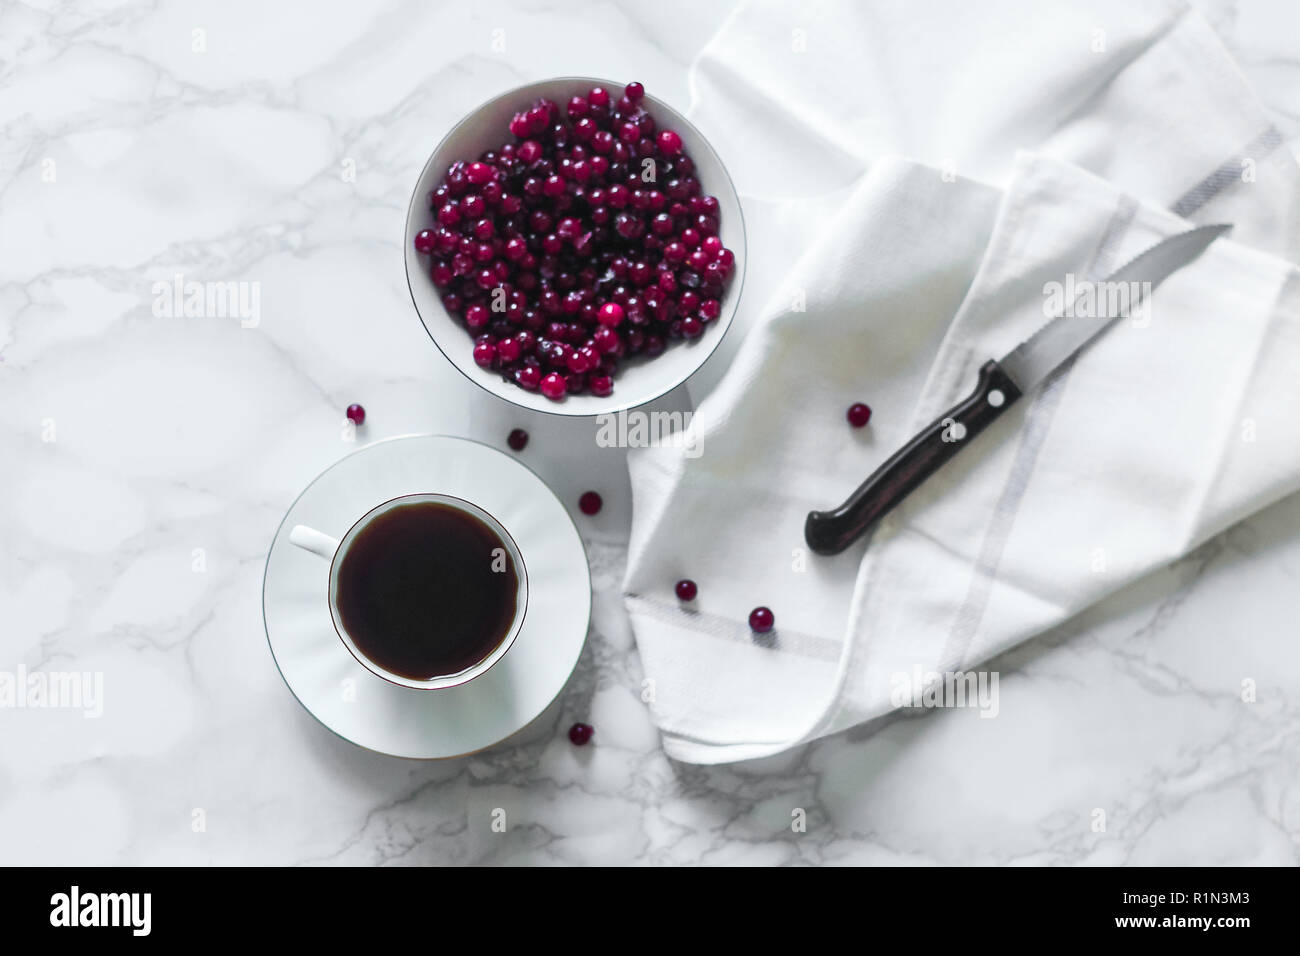 cranberry cowberry on marble background with cup Stock Photo